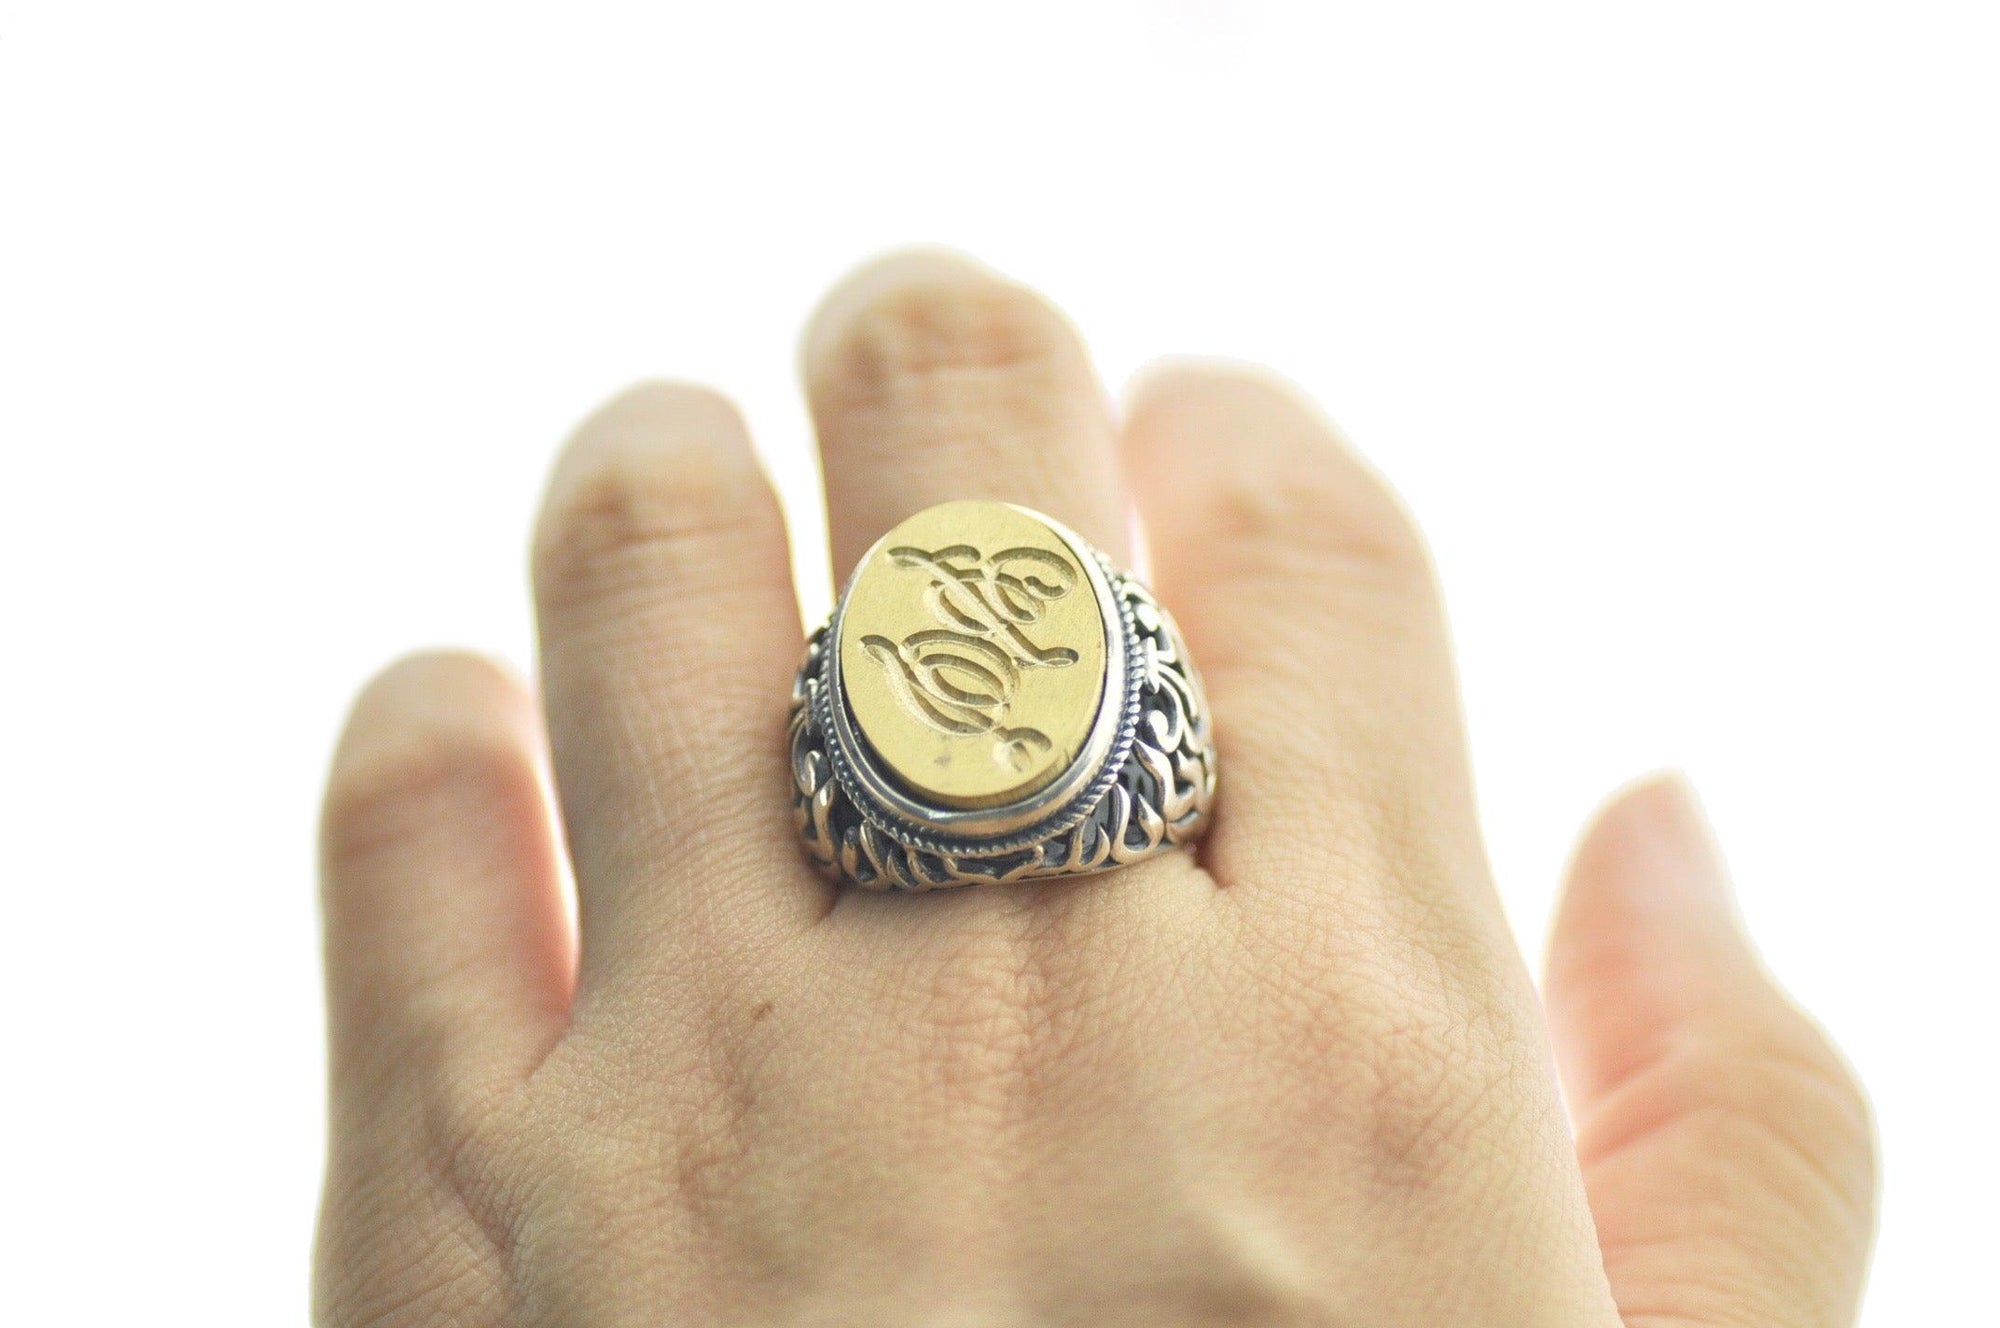 Calligraphy Double Initials Signet Ring - Backtozero B20 - 1520f, 15x20mm, 2 initials, 2initials_no_and, accessory, bespoke, Custom, custom ring, Double Initials, genericlonghandle, him, initial ring, jewelry, Monogram, oval, oval ring, Personalized, ring, signet ring, size 10, size 11, size 9, Two initials, wax seal, wax seal ring